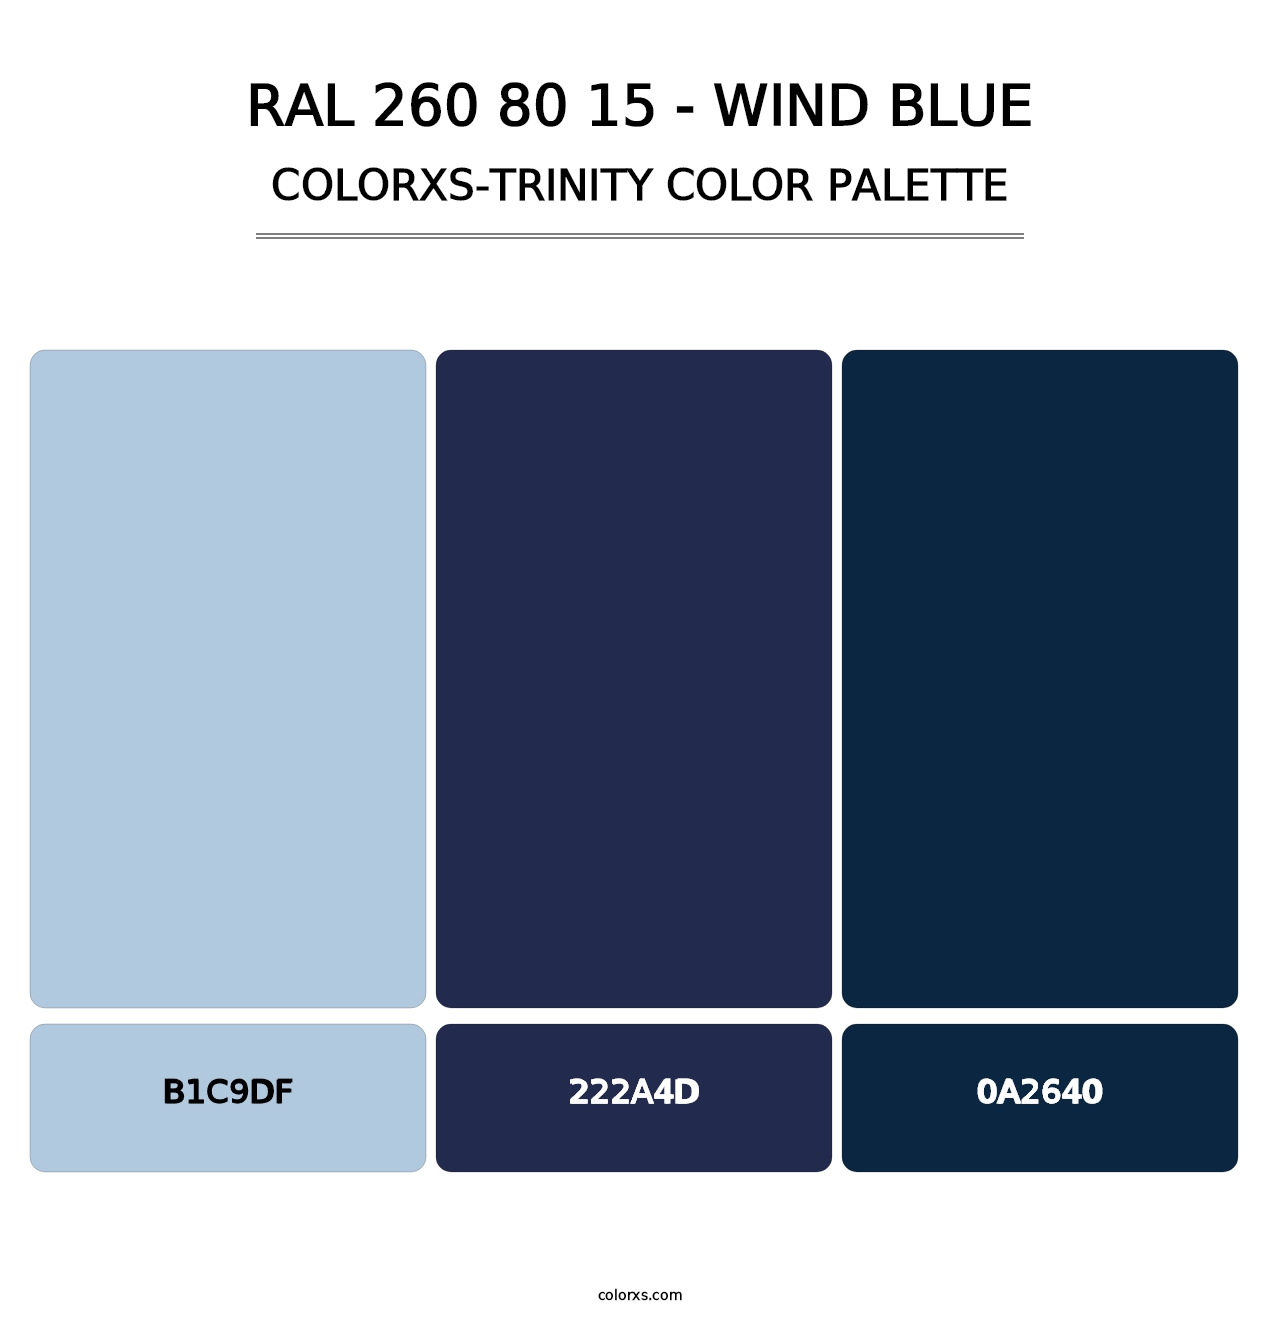 RAL 260 80 15 - Wind Blue - Colorxs Trinity Palette